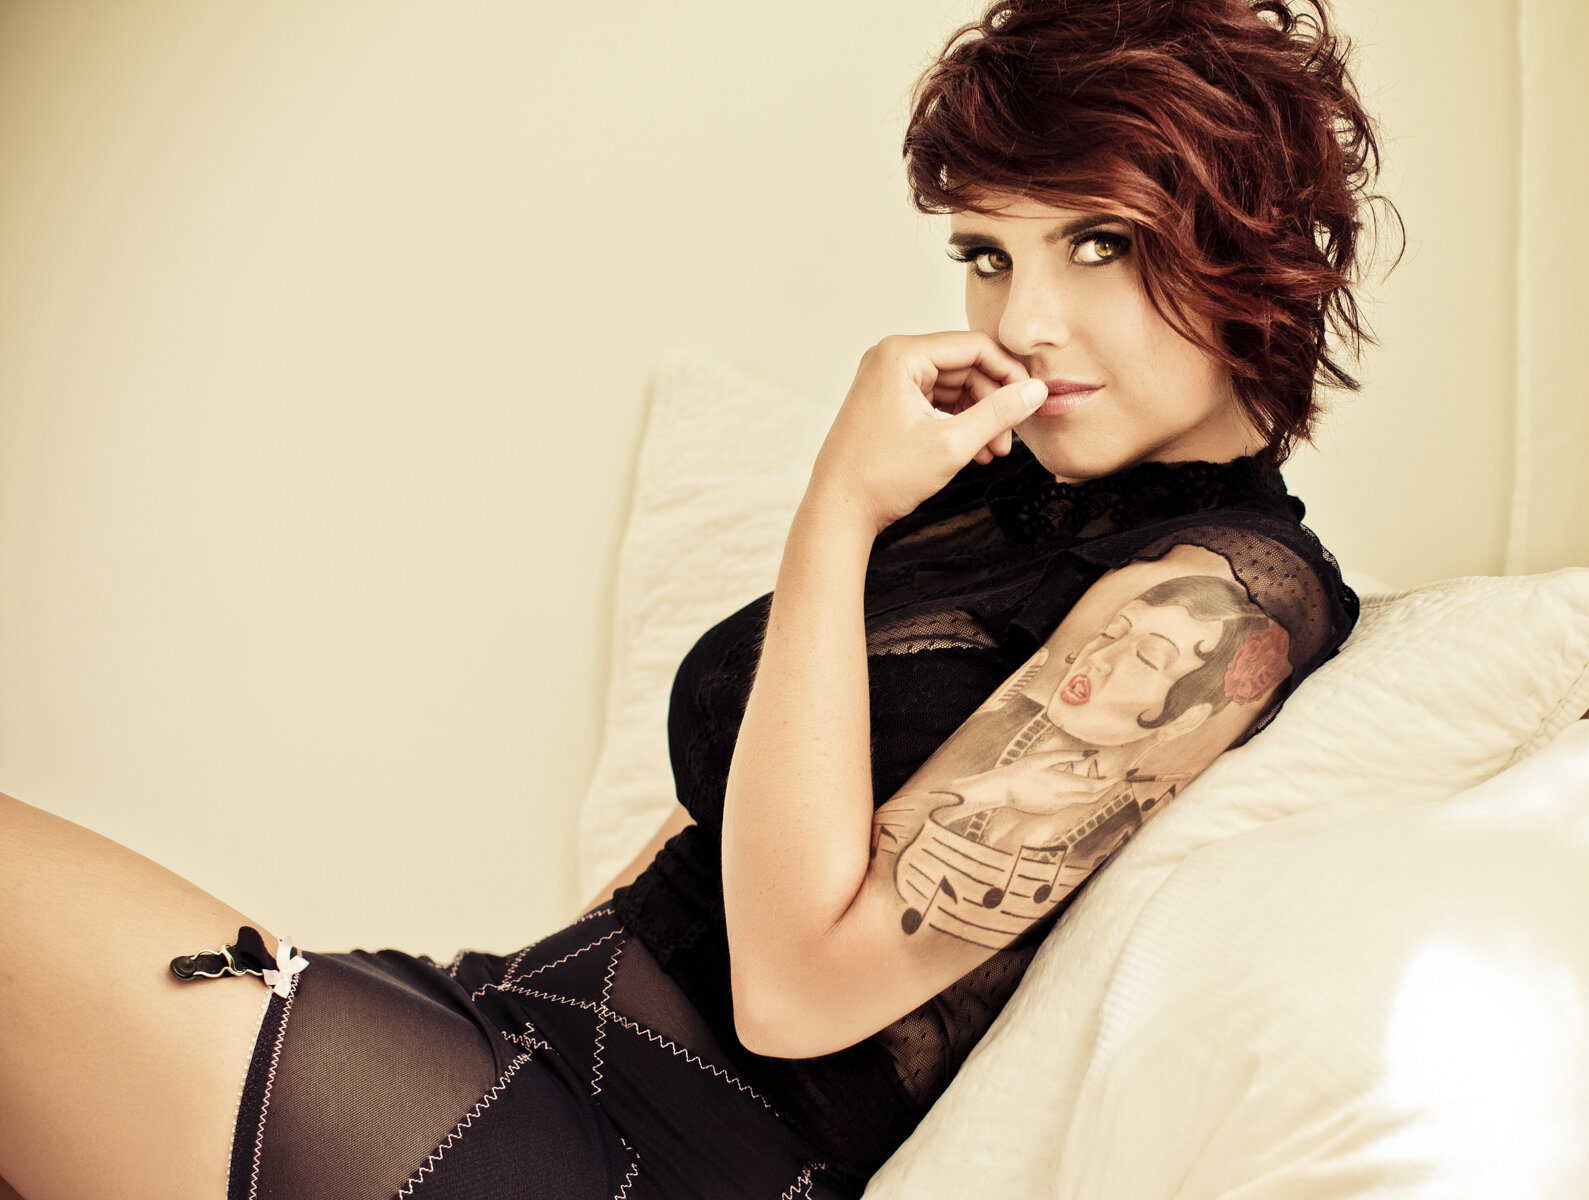 photo of dark short hair woman with sleeve tattoos sitting on a bed